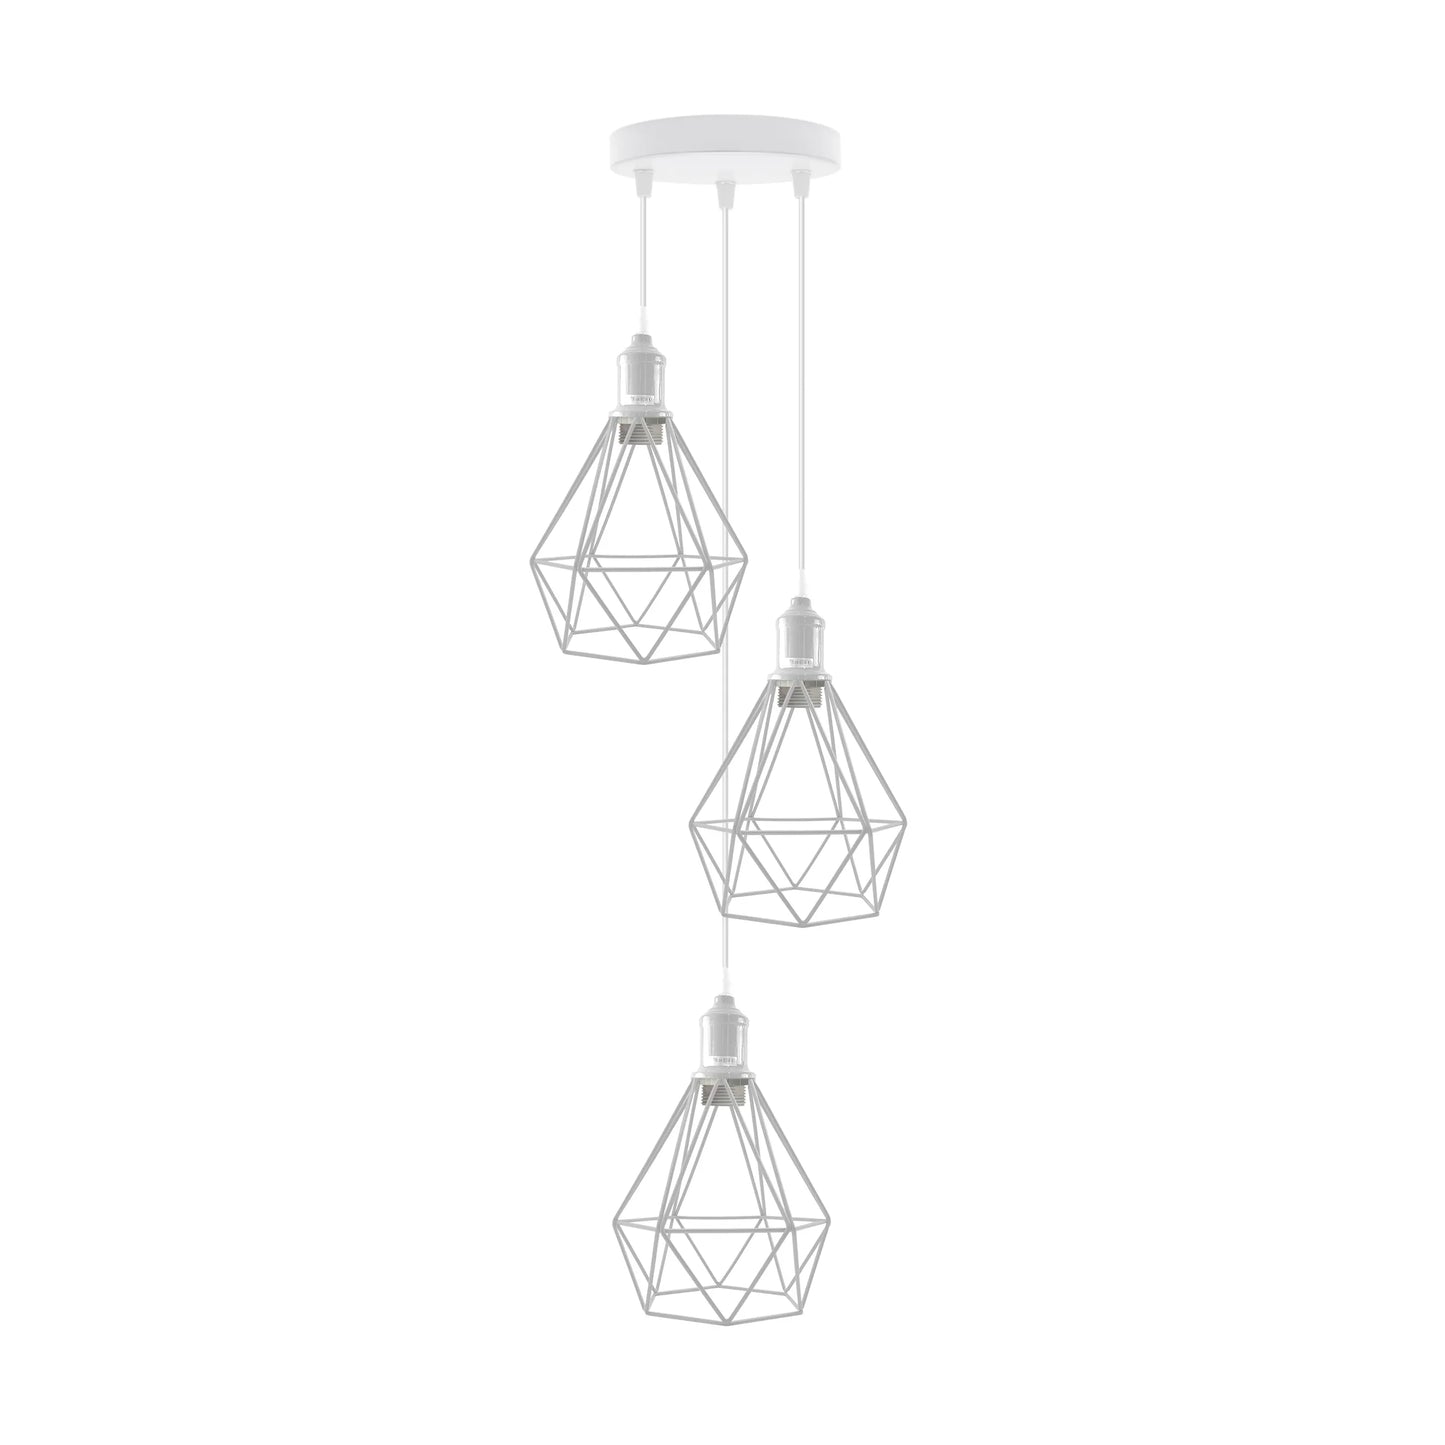 3-way Diamond Cage Shade White Ceiling Pendant Lamp Fittings